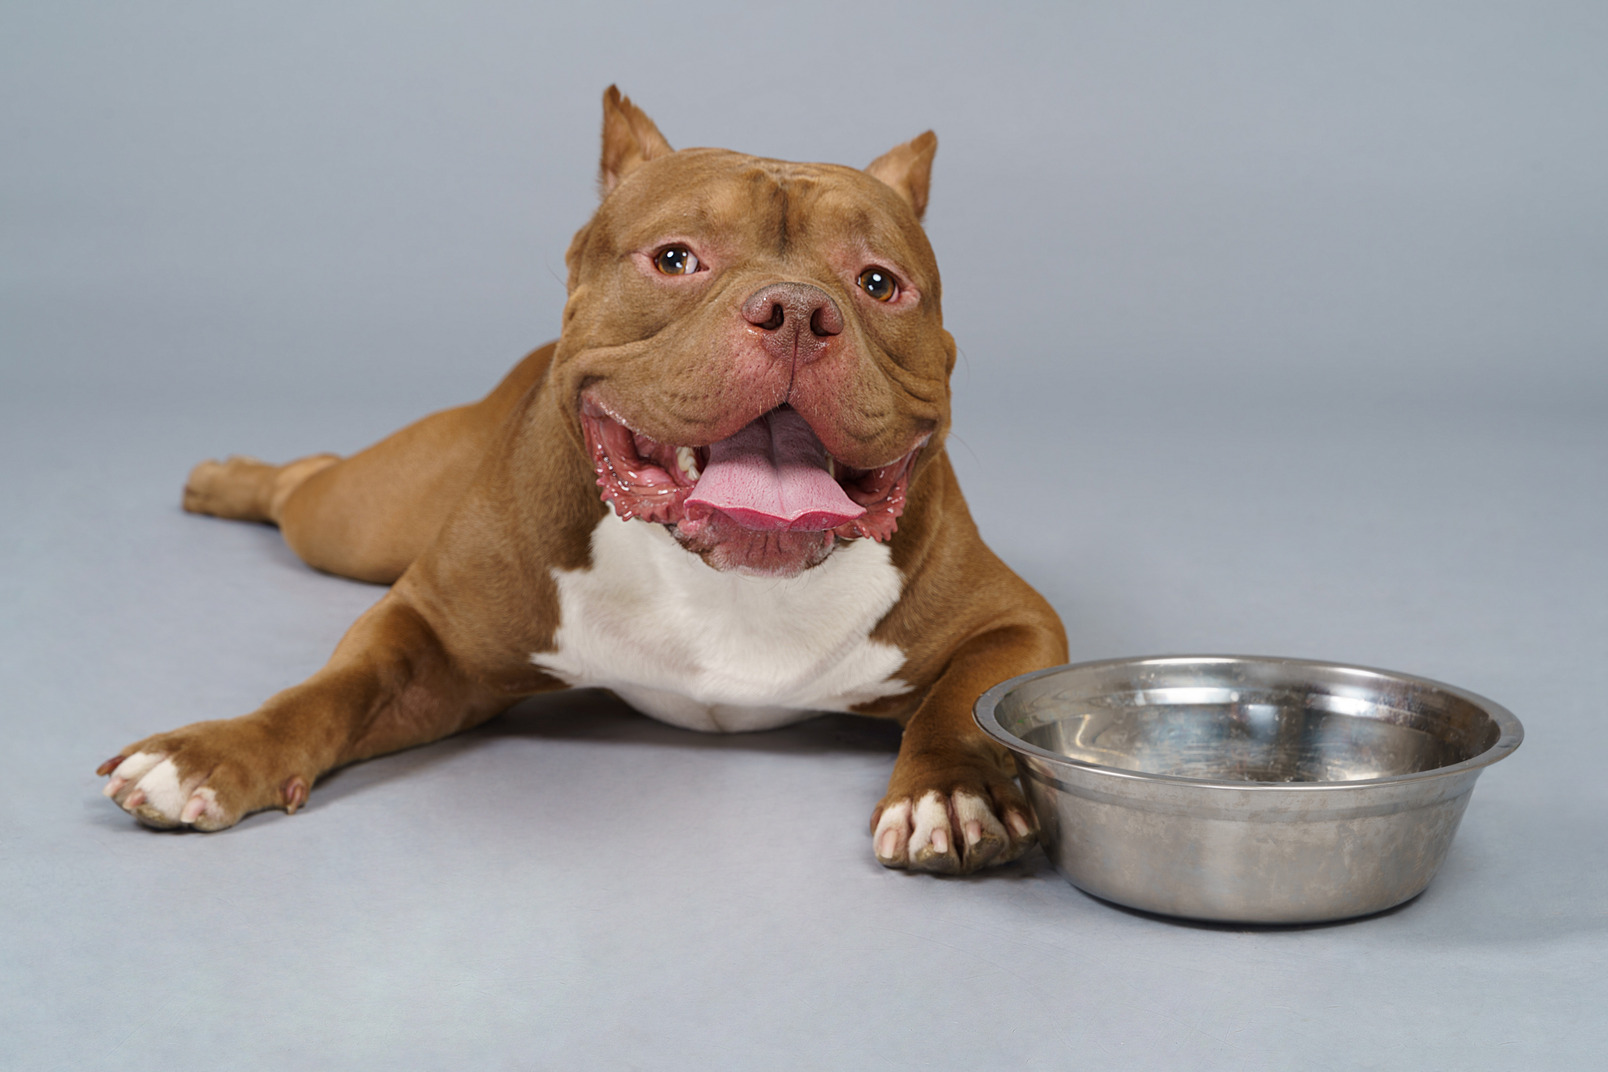 Front view of a brown bulldog lying near steel bowl and looking aside